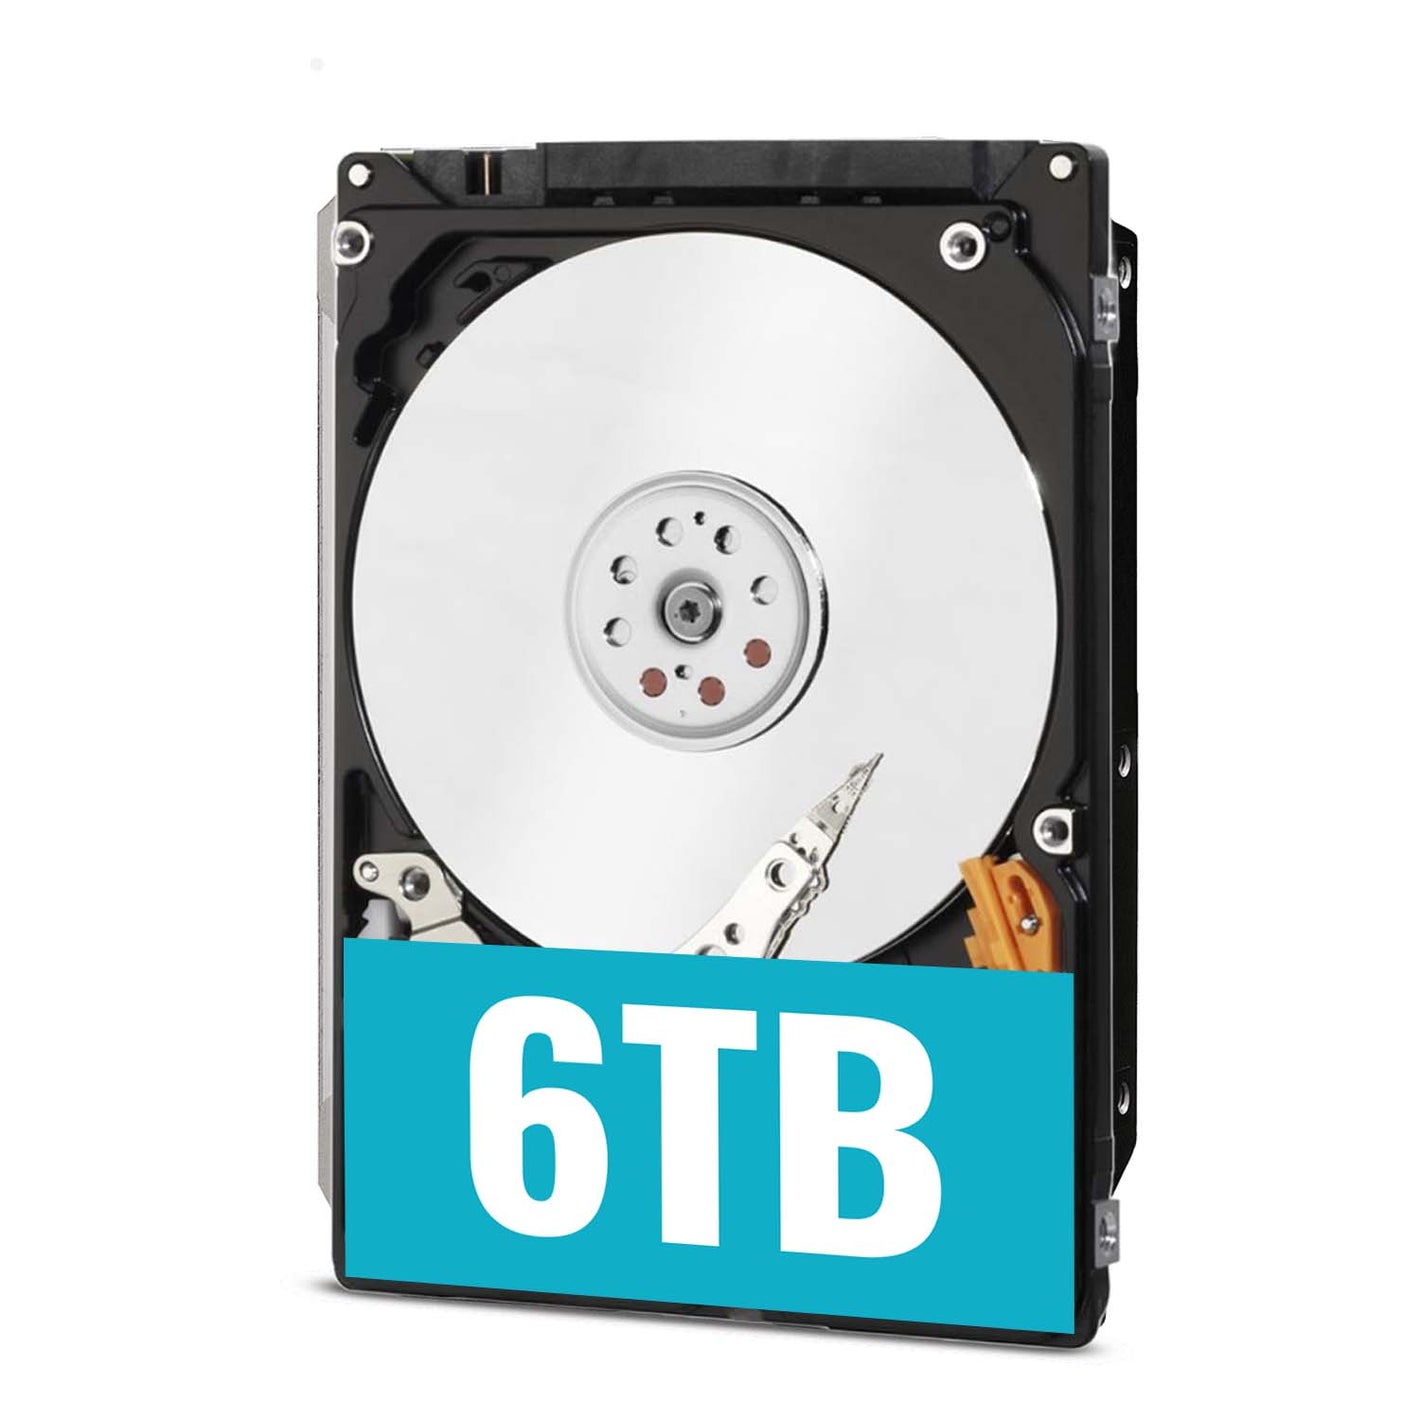 Pre-Installed HDD Upgrade to 6TB